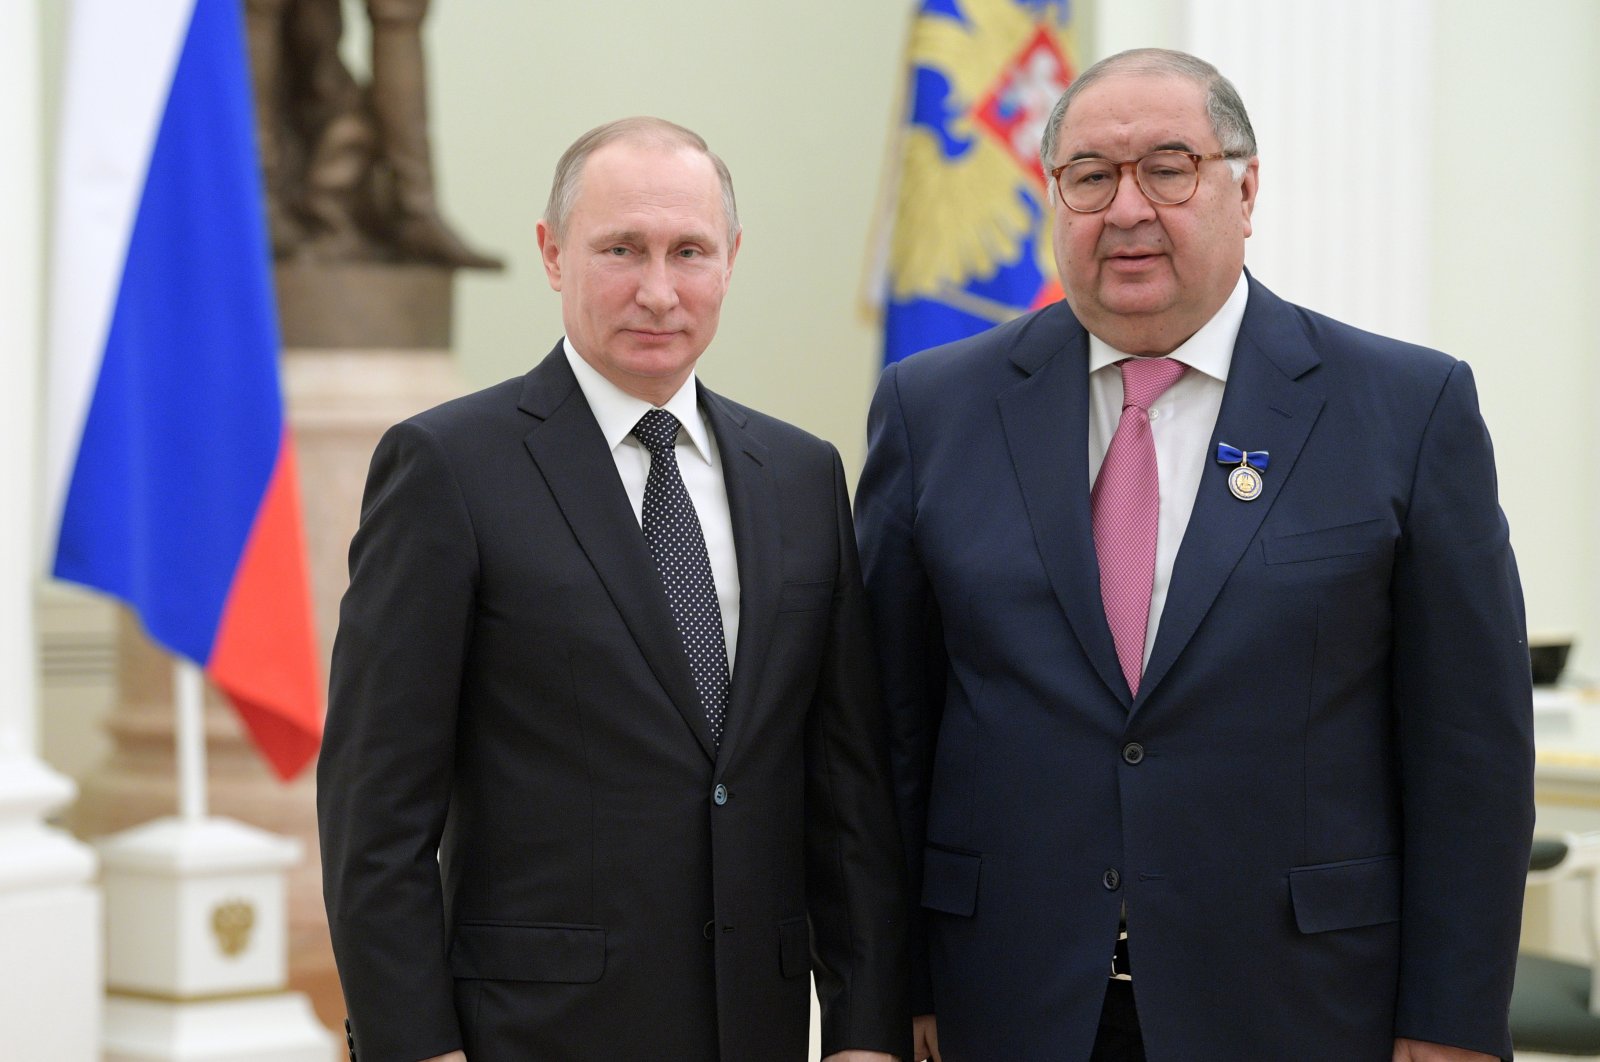 Russian President Vladimir Putin (L), poses for a photo with USM Holdings founder, businessperson Alisher Usmanov during an awarding ceremony in Moscow&#039;s Kremlin, Russia, Jan. 26, 2017. (AP Photo)